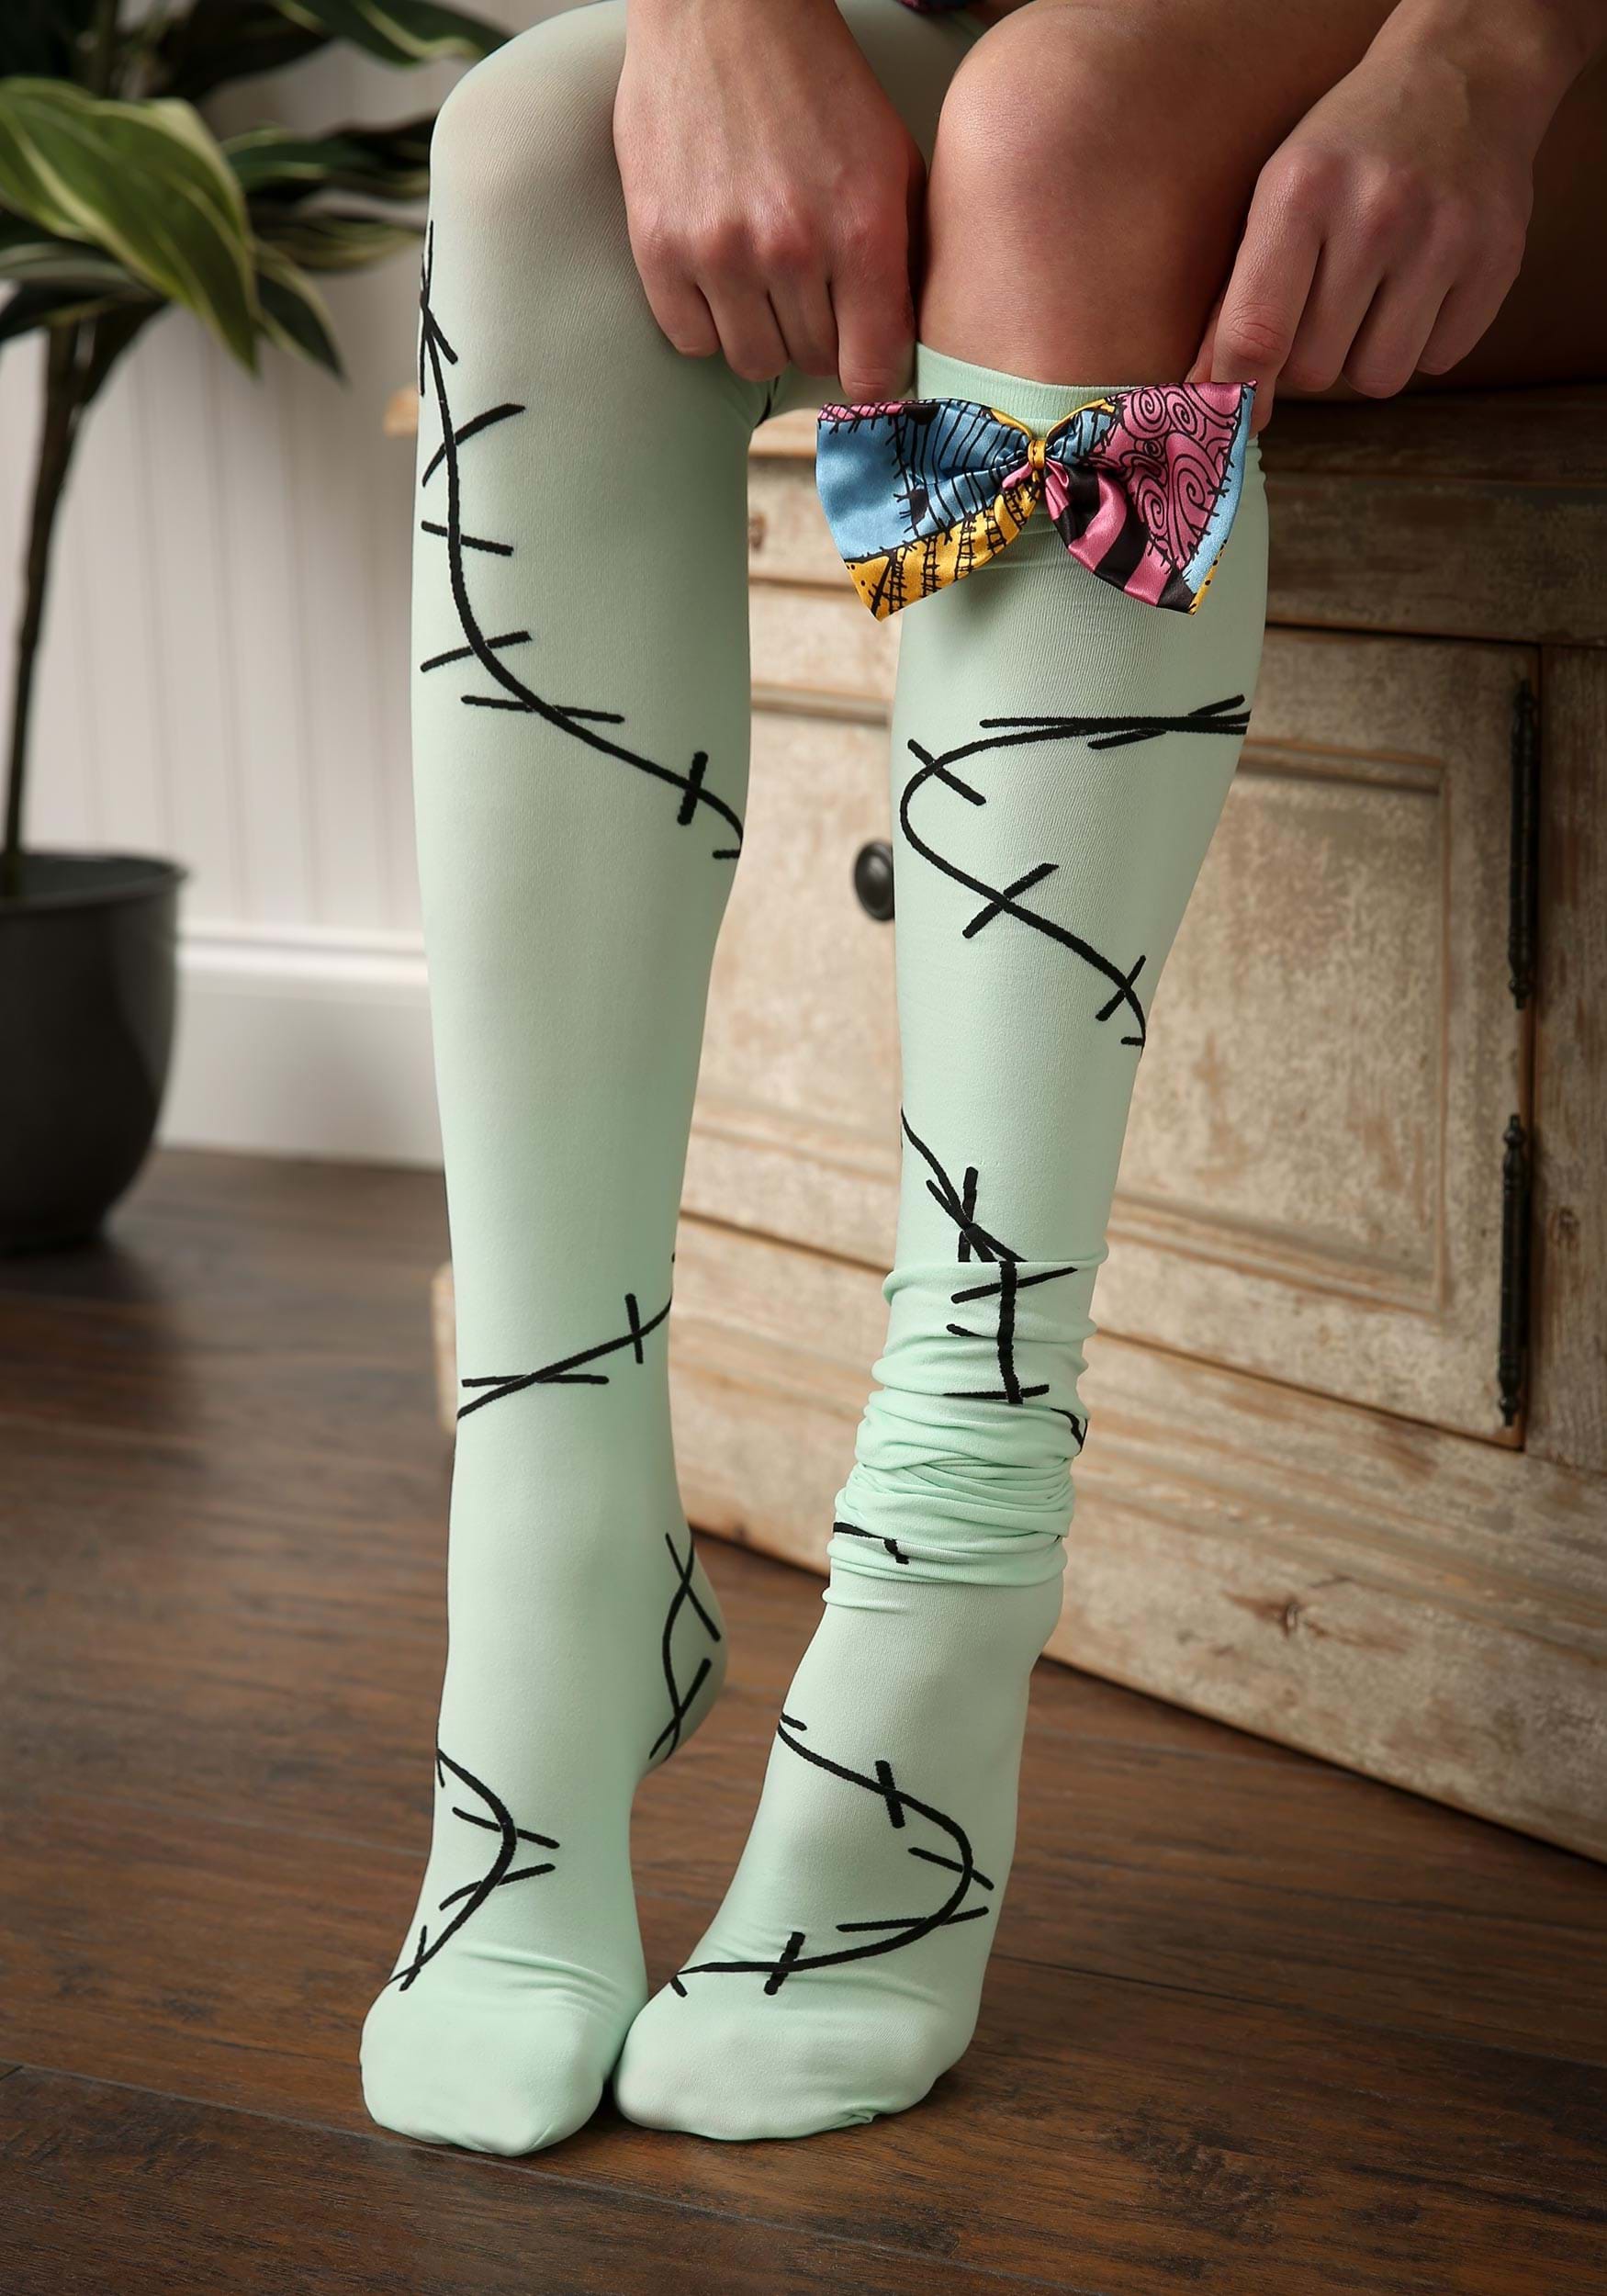 https://images.halloweencostumes.com/products/56417/1-1/nightmare-before-christmas-sally-womens-over-the-knee-socks.jpg